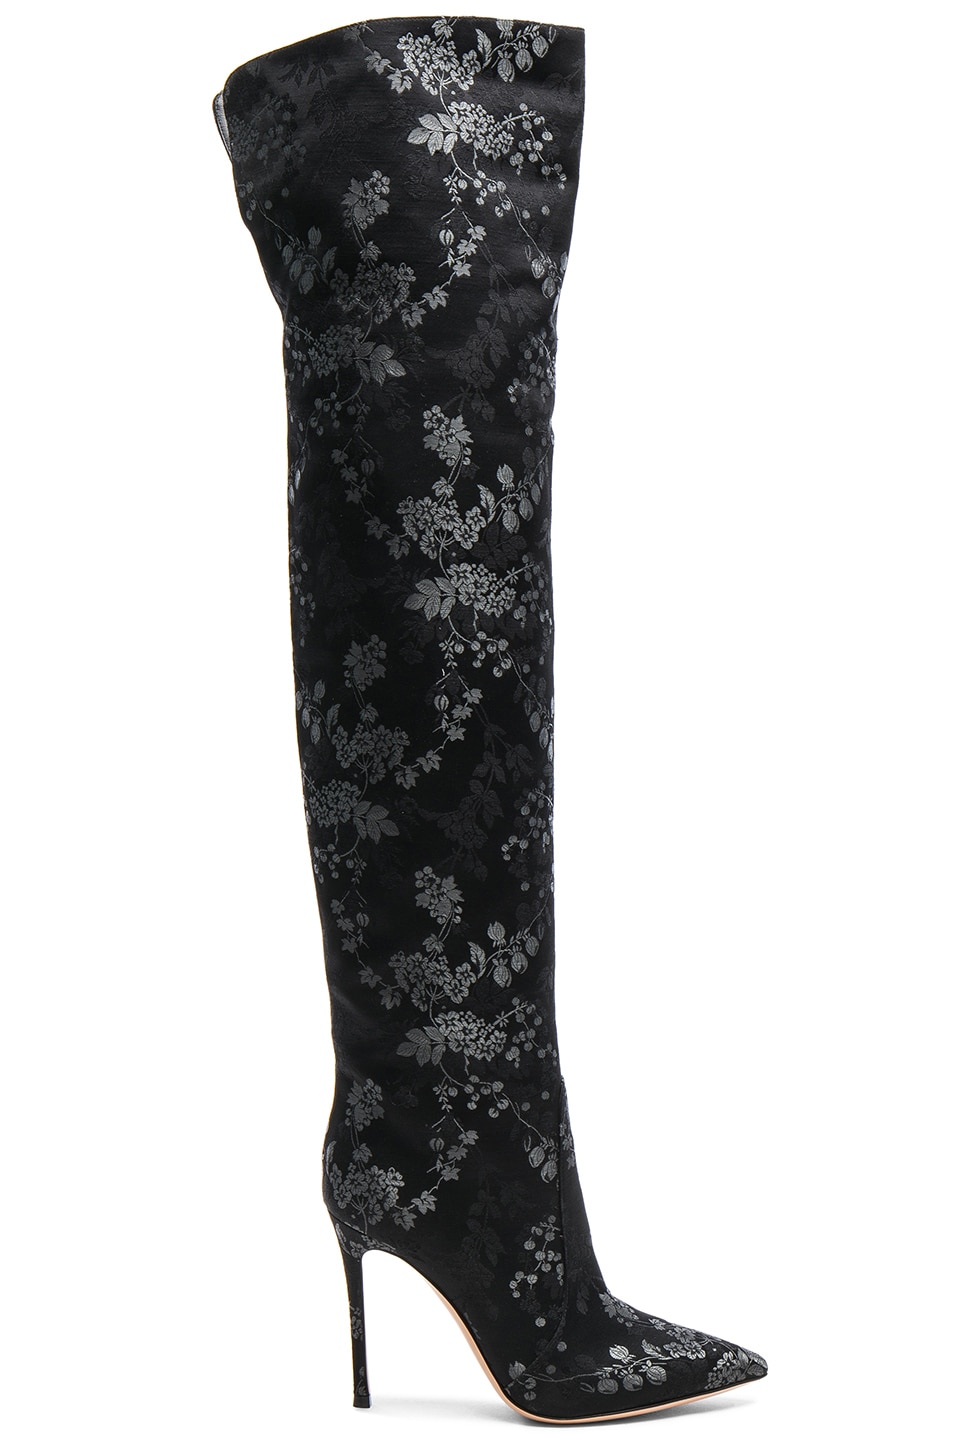 Gianvito Rossi Embroidered Silk Rennes Thigh High Boots in Black | FWRD